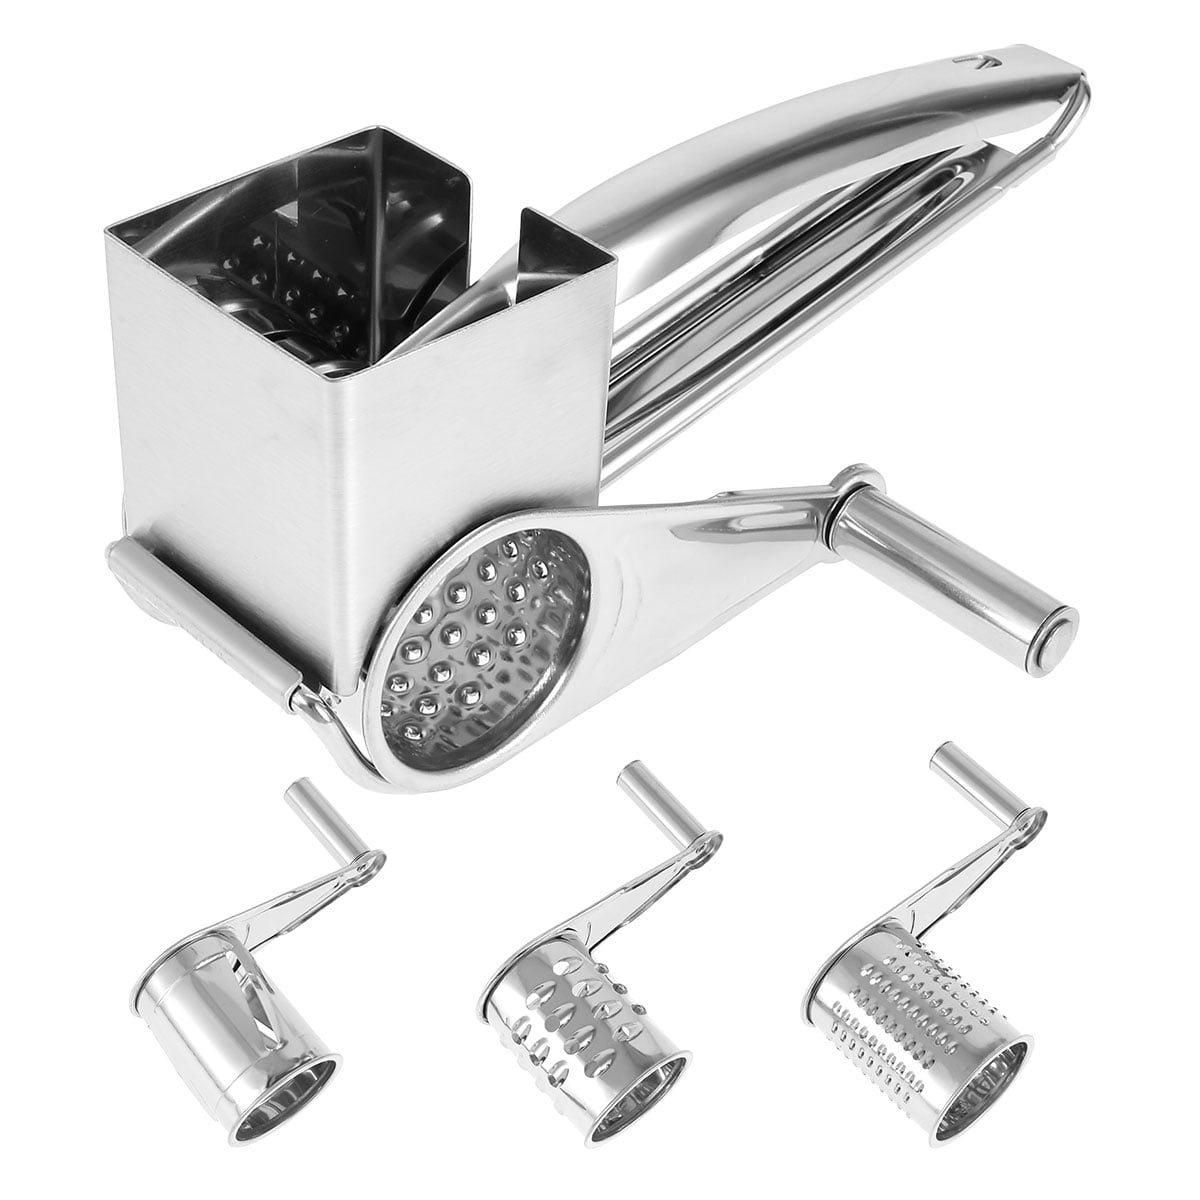 VerPetridure Stainless Steel Cheese Vegetables Grater Rotary Cheese Nut  Spice Grater Shredder 